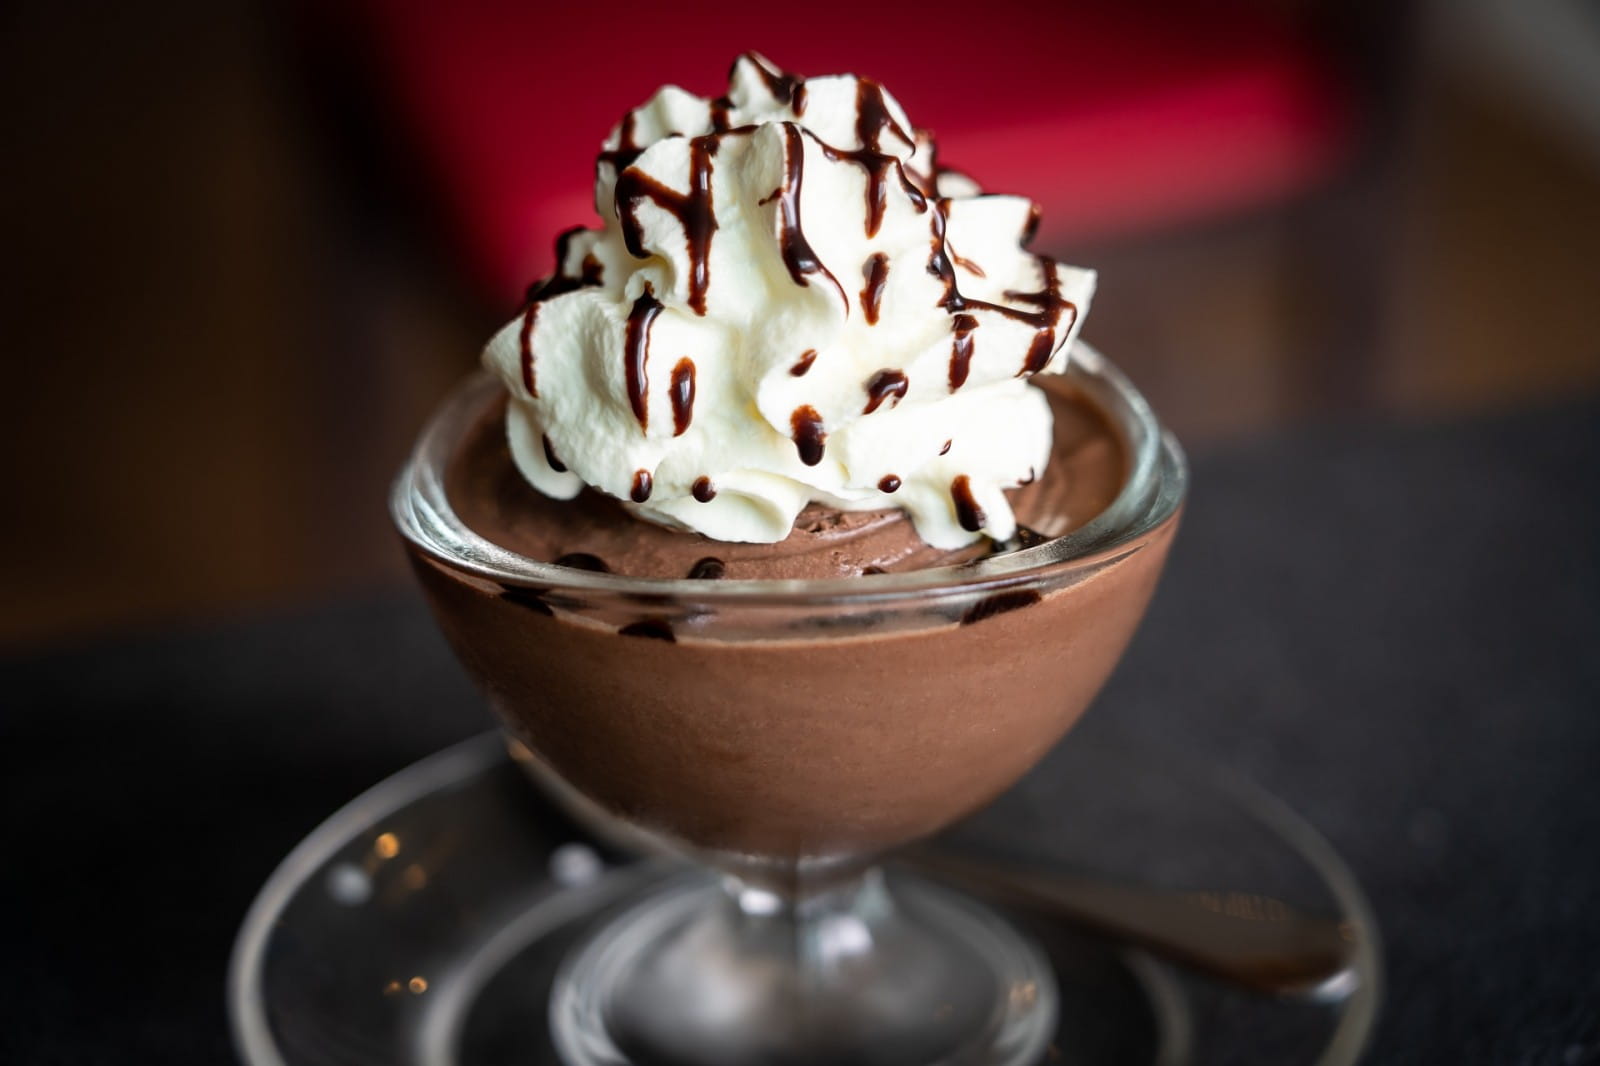 6 of the best matches for chocolate mousse